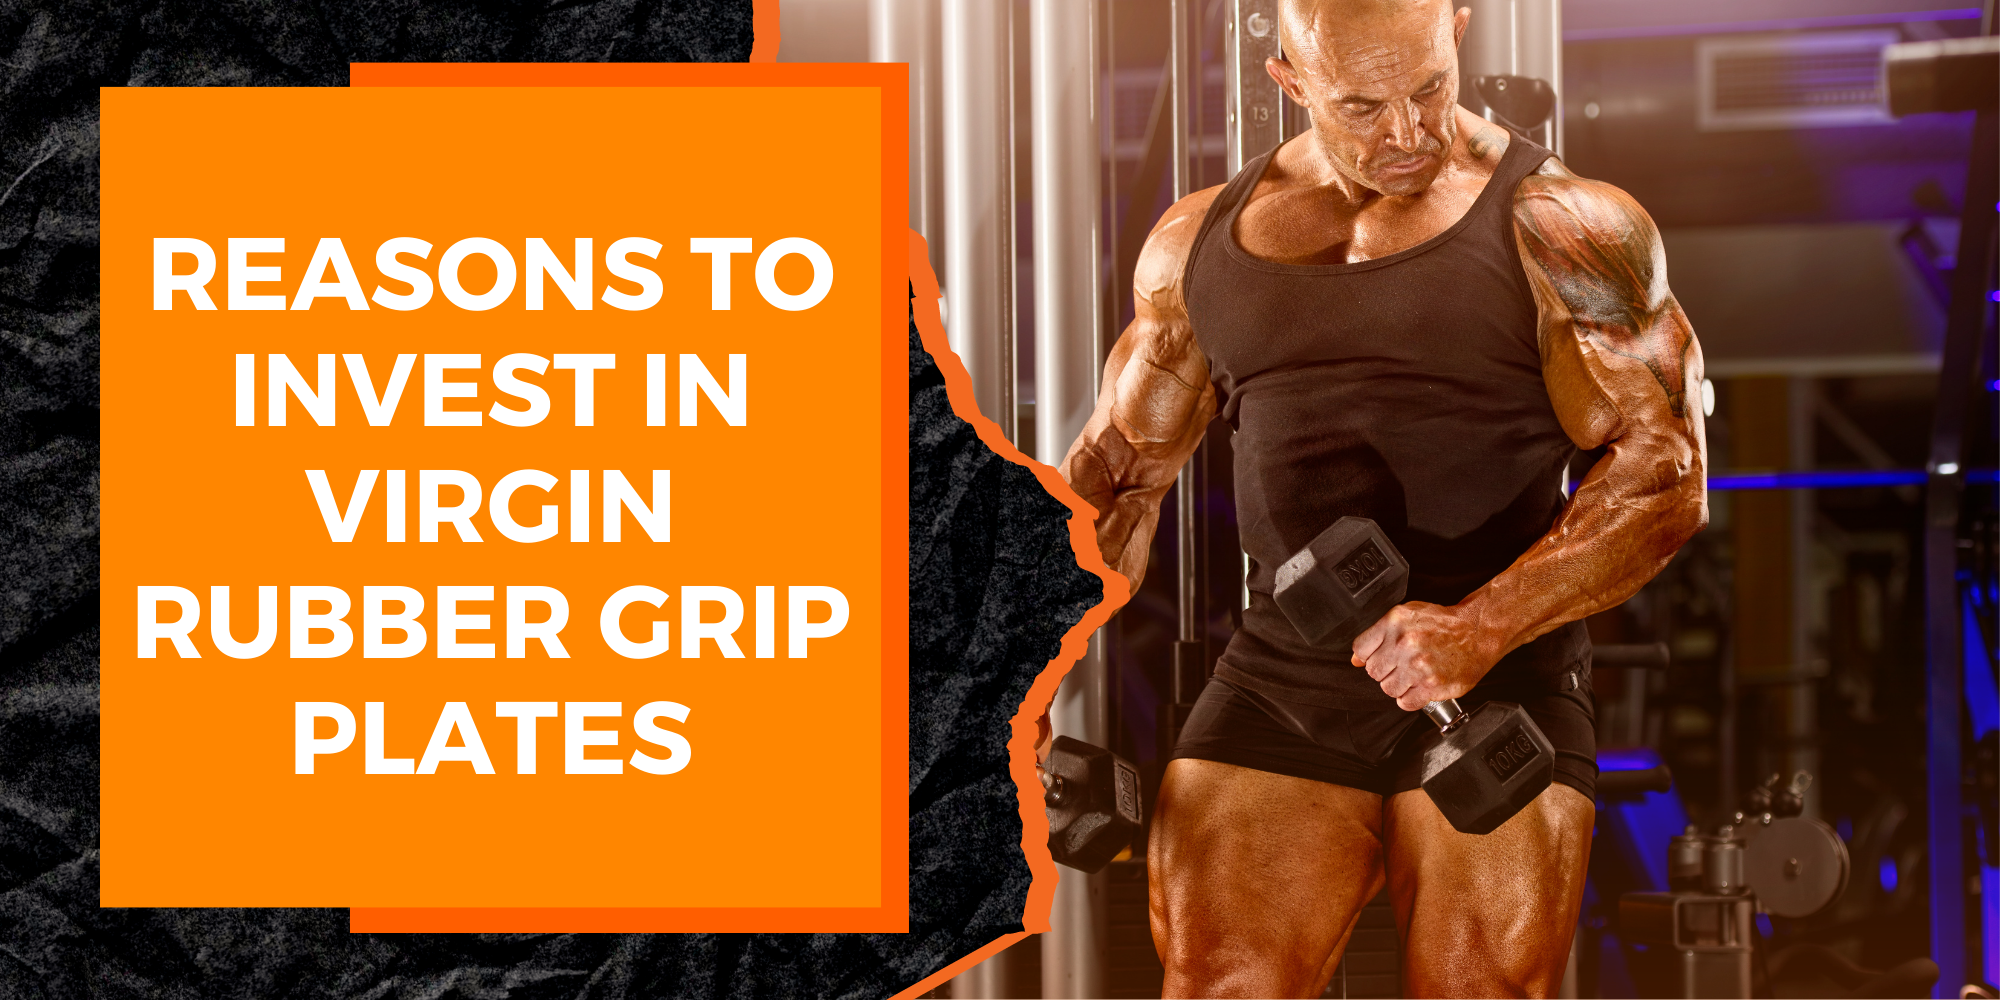 Reasons to Invest in Virgin Rubber Grip Plates